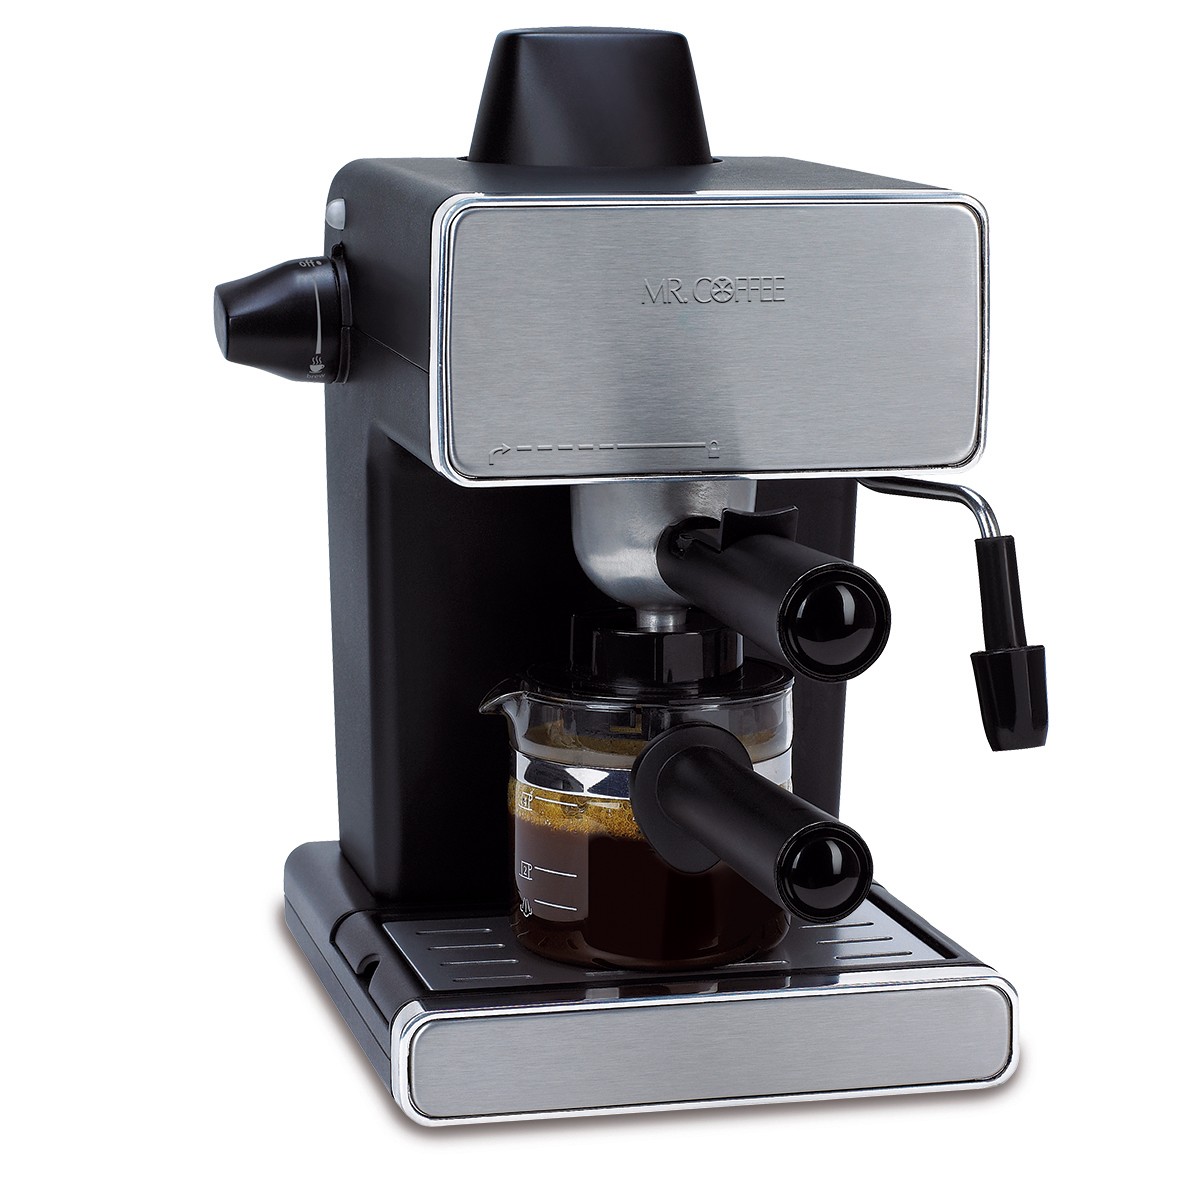 Mr. Coffee Espresso Maker, Stainless Steel and Black, BVMC-ECM260 - image 1 of 4